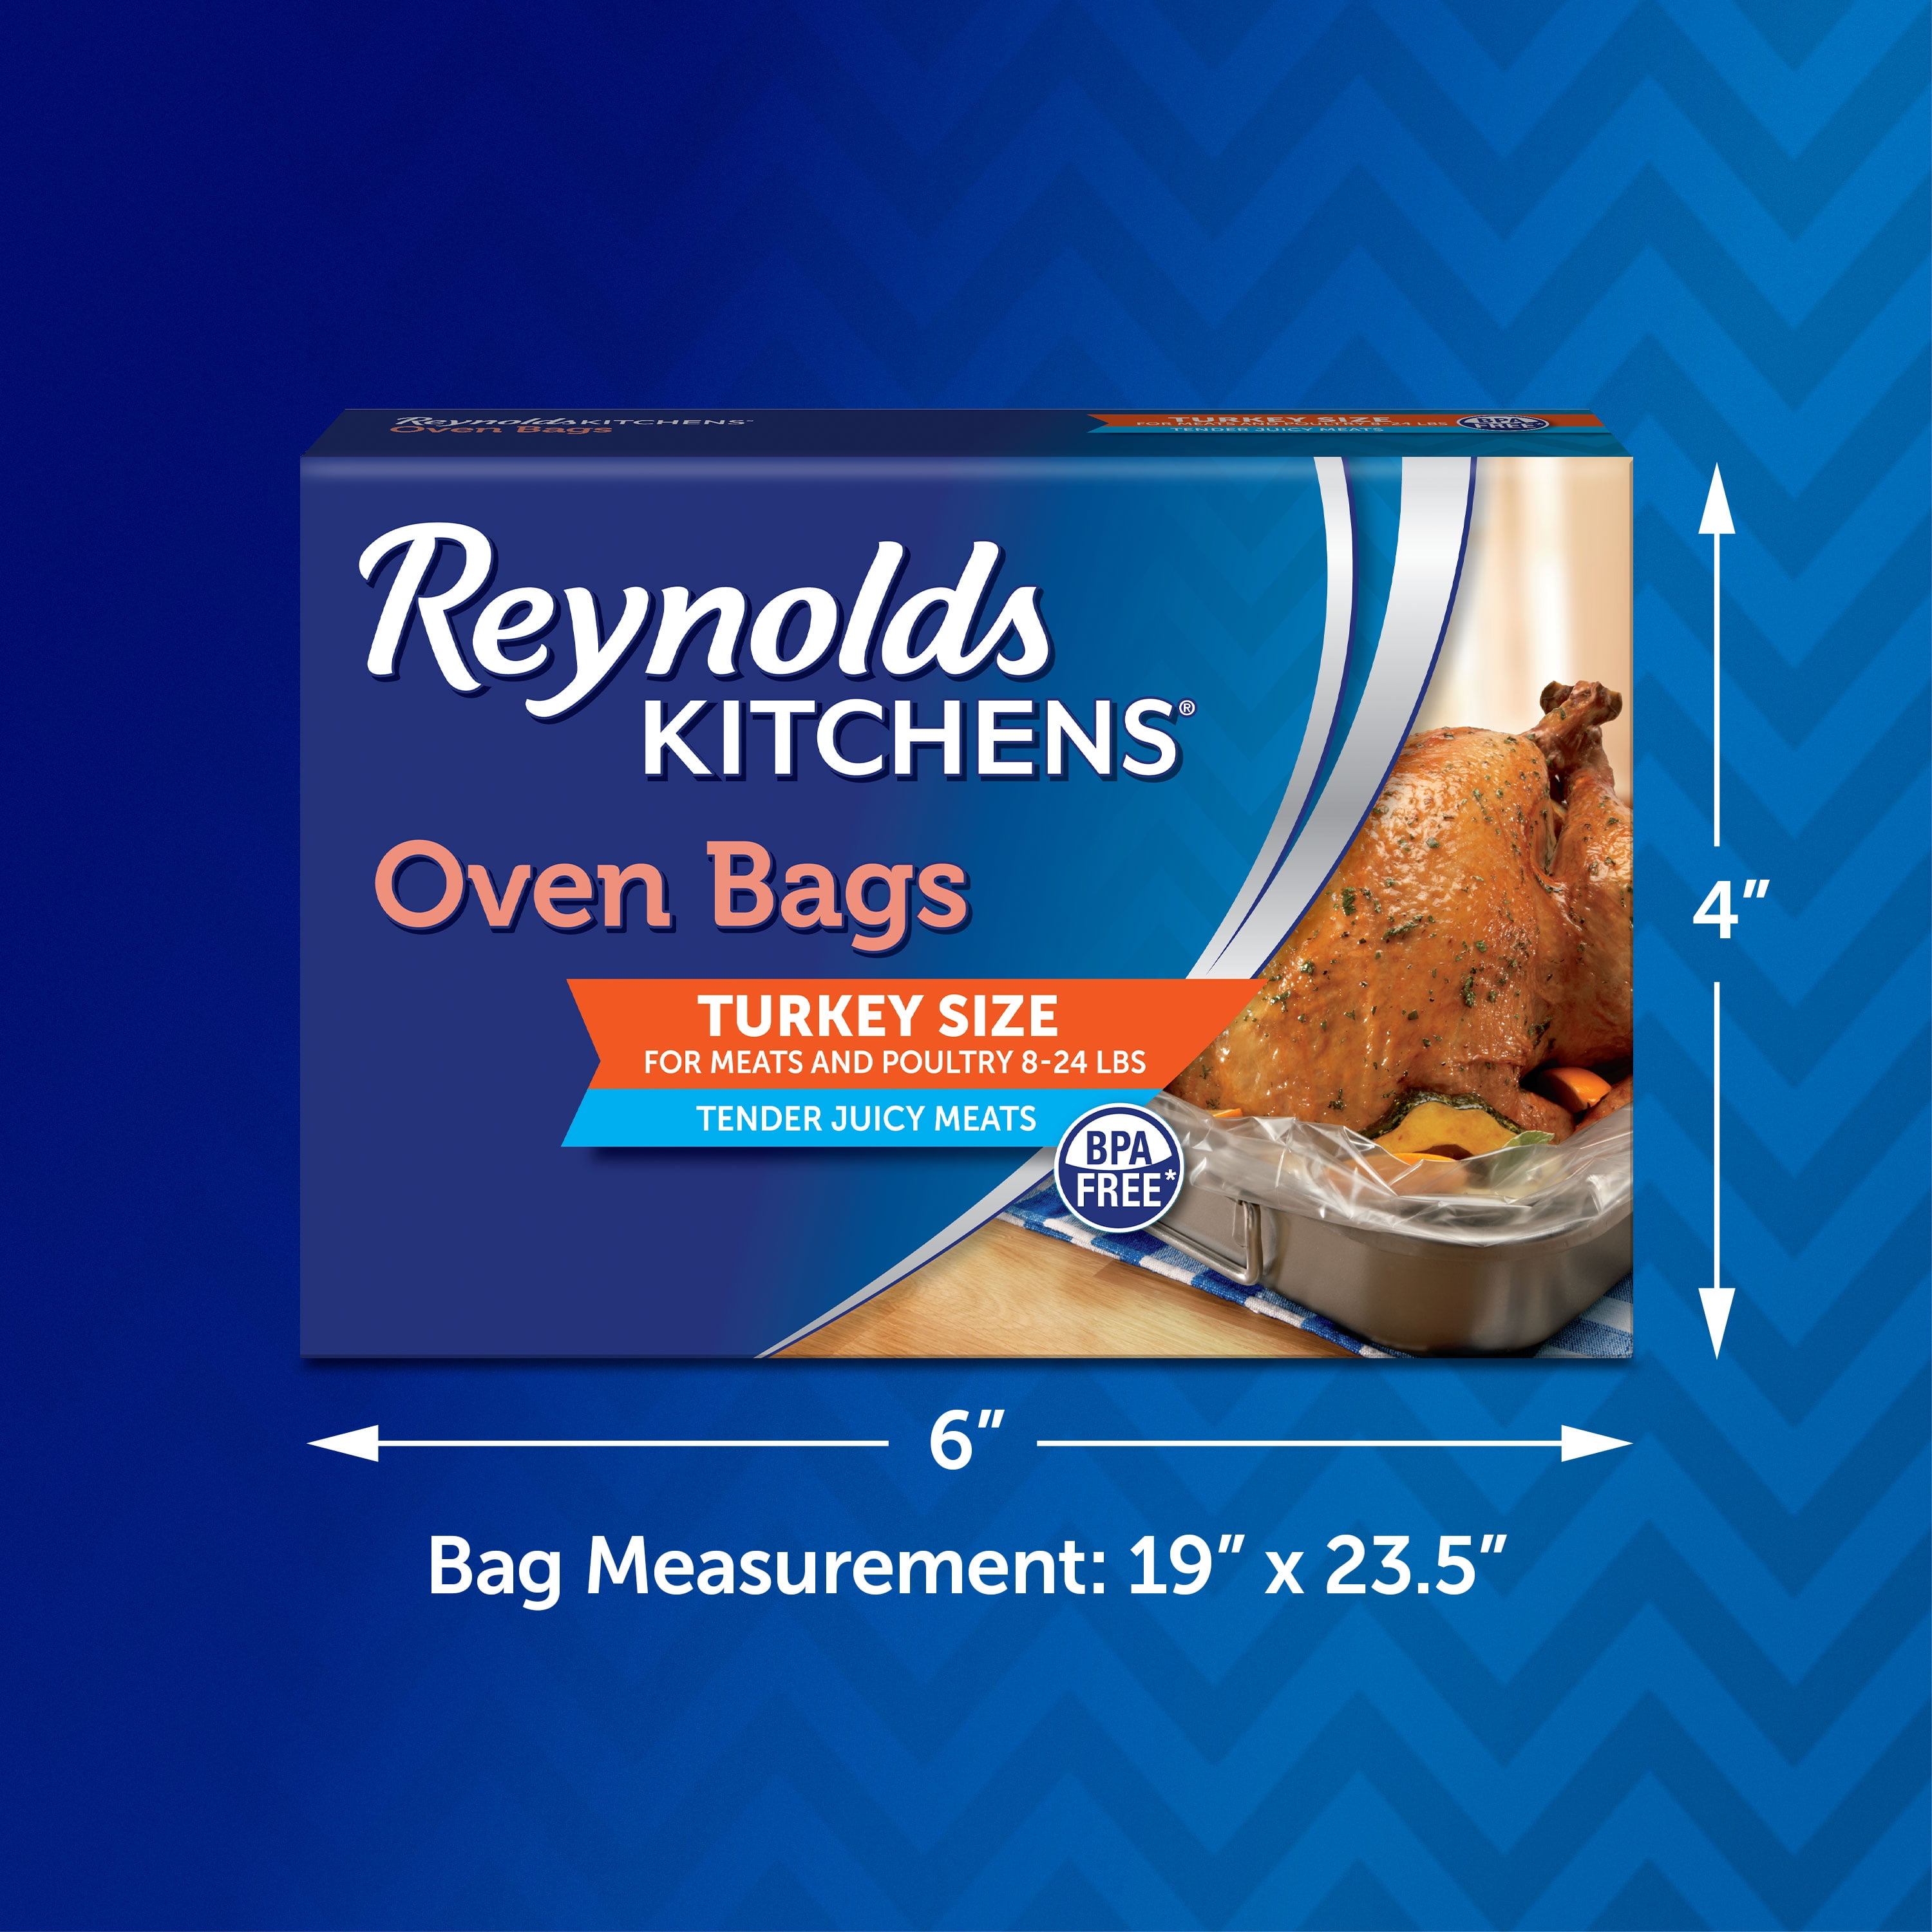 Reynolds Turkey Size Oven Cooking Bags 2 Count  Cook Brined Turkey Oven Bag  - Turkey - Aliexpress